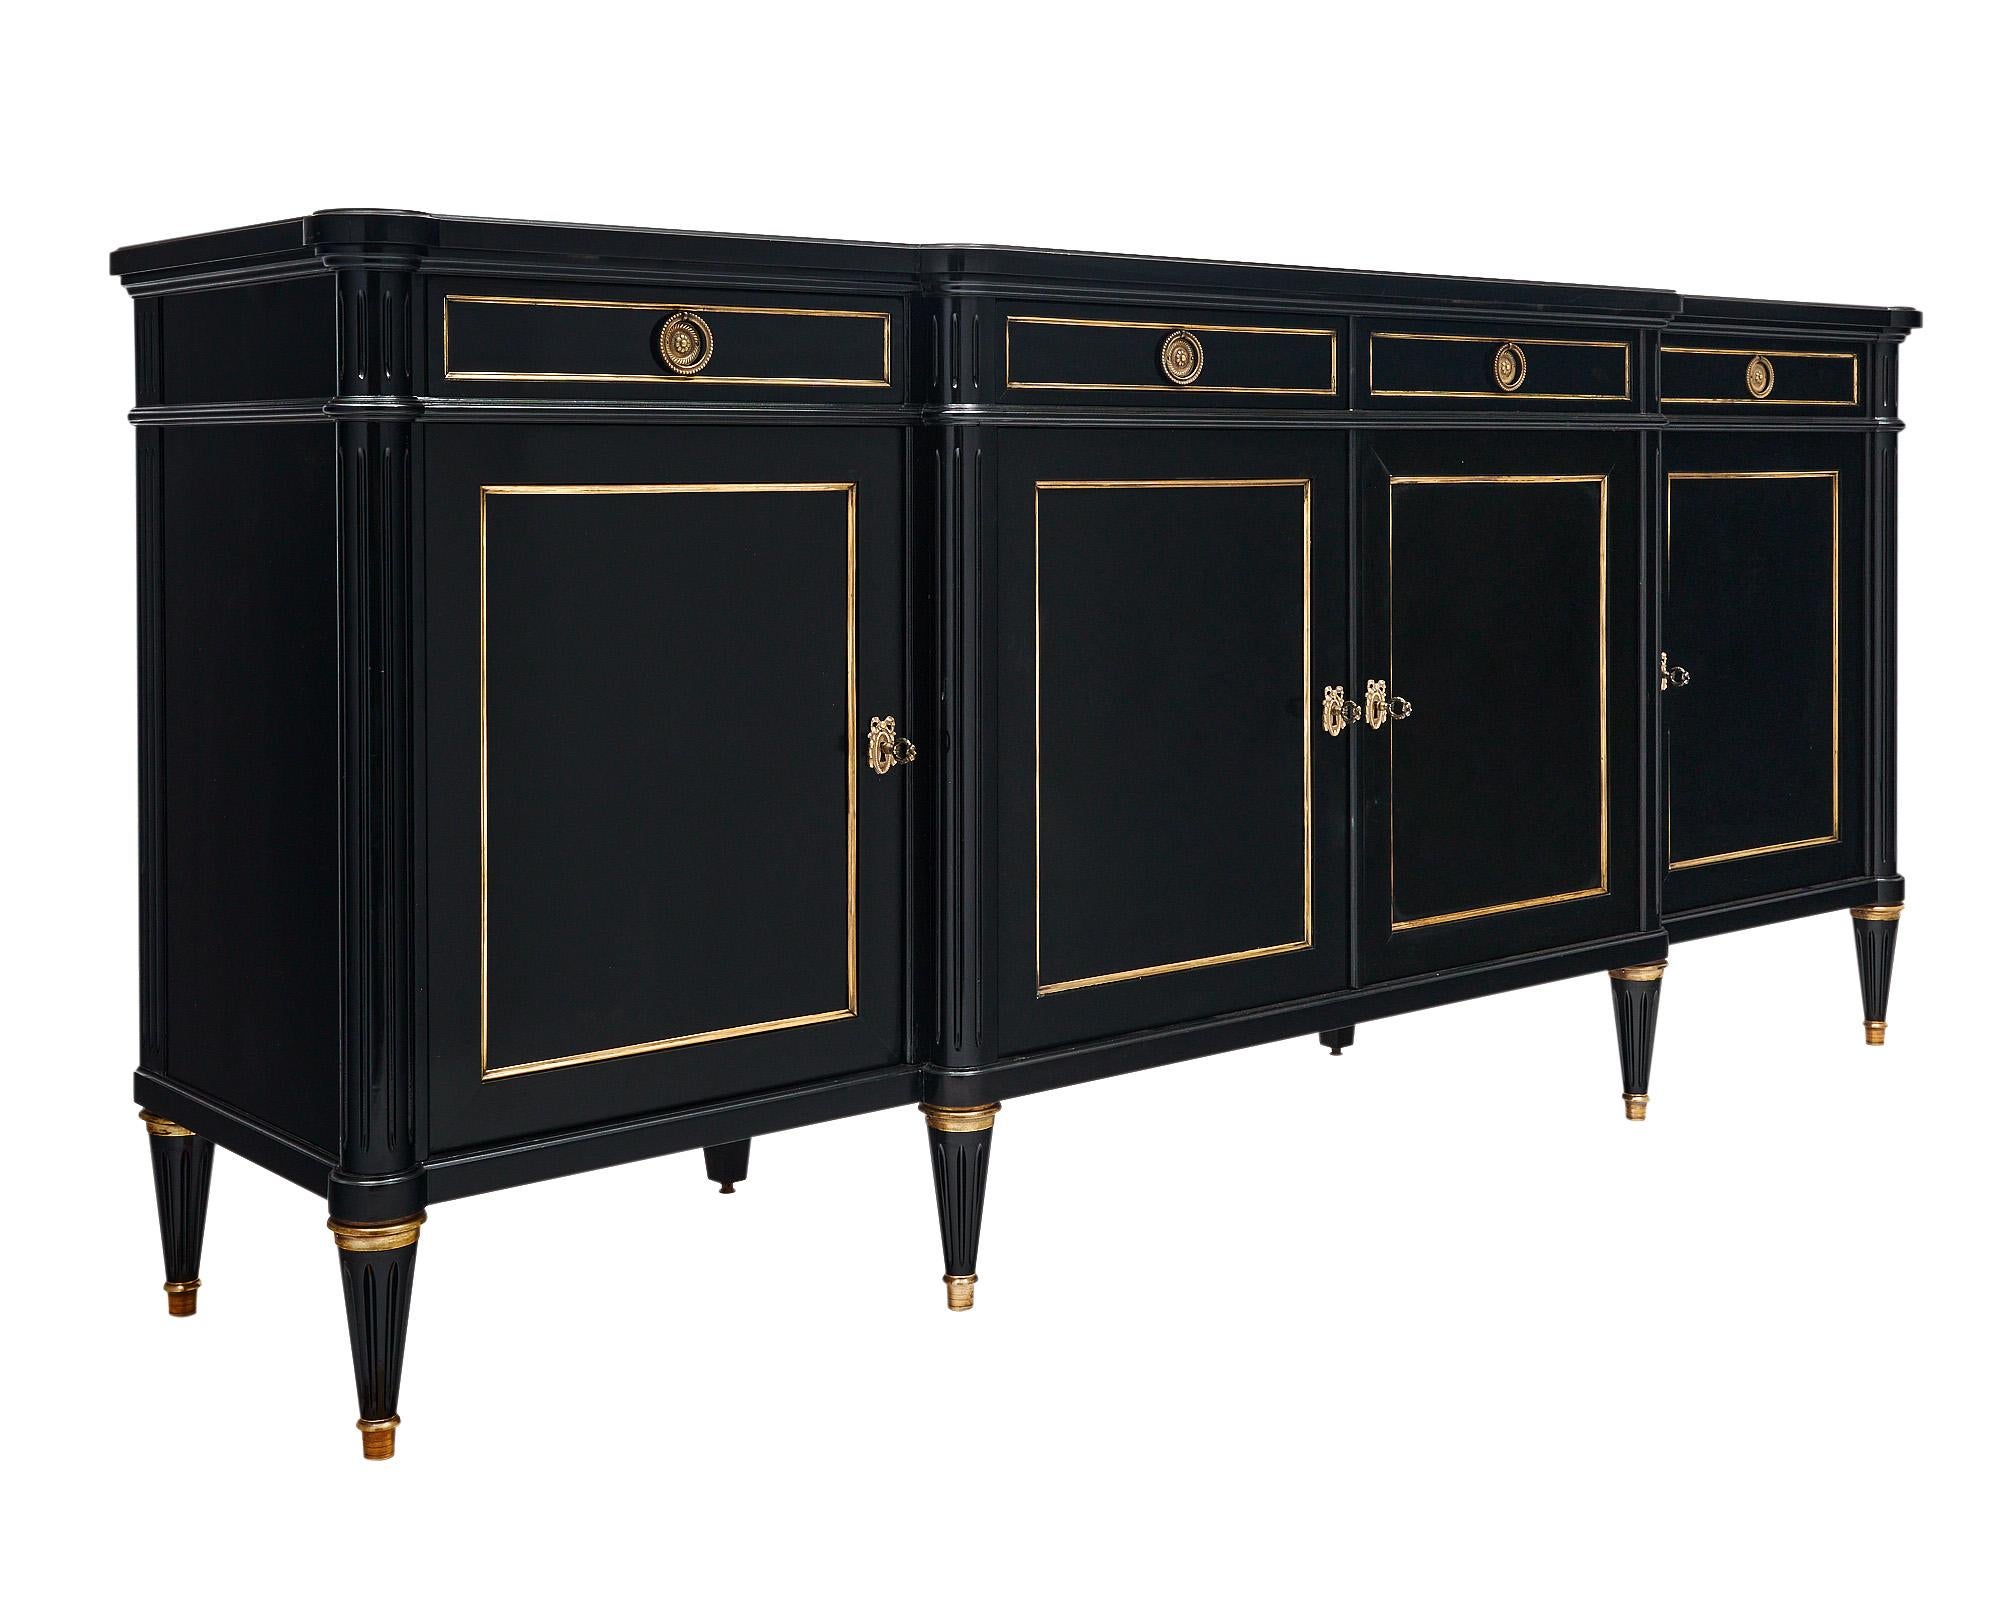 Buffet from France in the Louis XVI style. This solid mahogany sideboard has been ebonized and finished with a lustrous museum-quality polish. There are four dovetailed drawers above four doors that open to interior shelving. This piece is supported